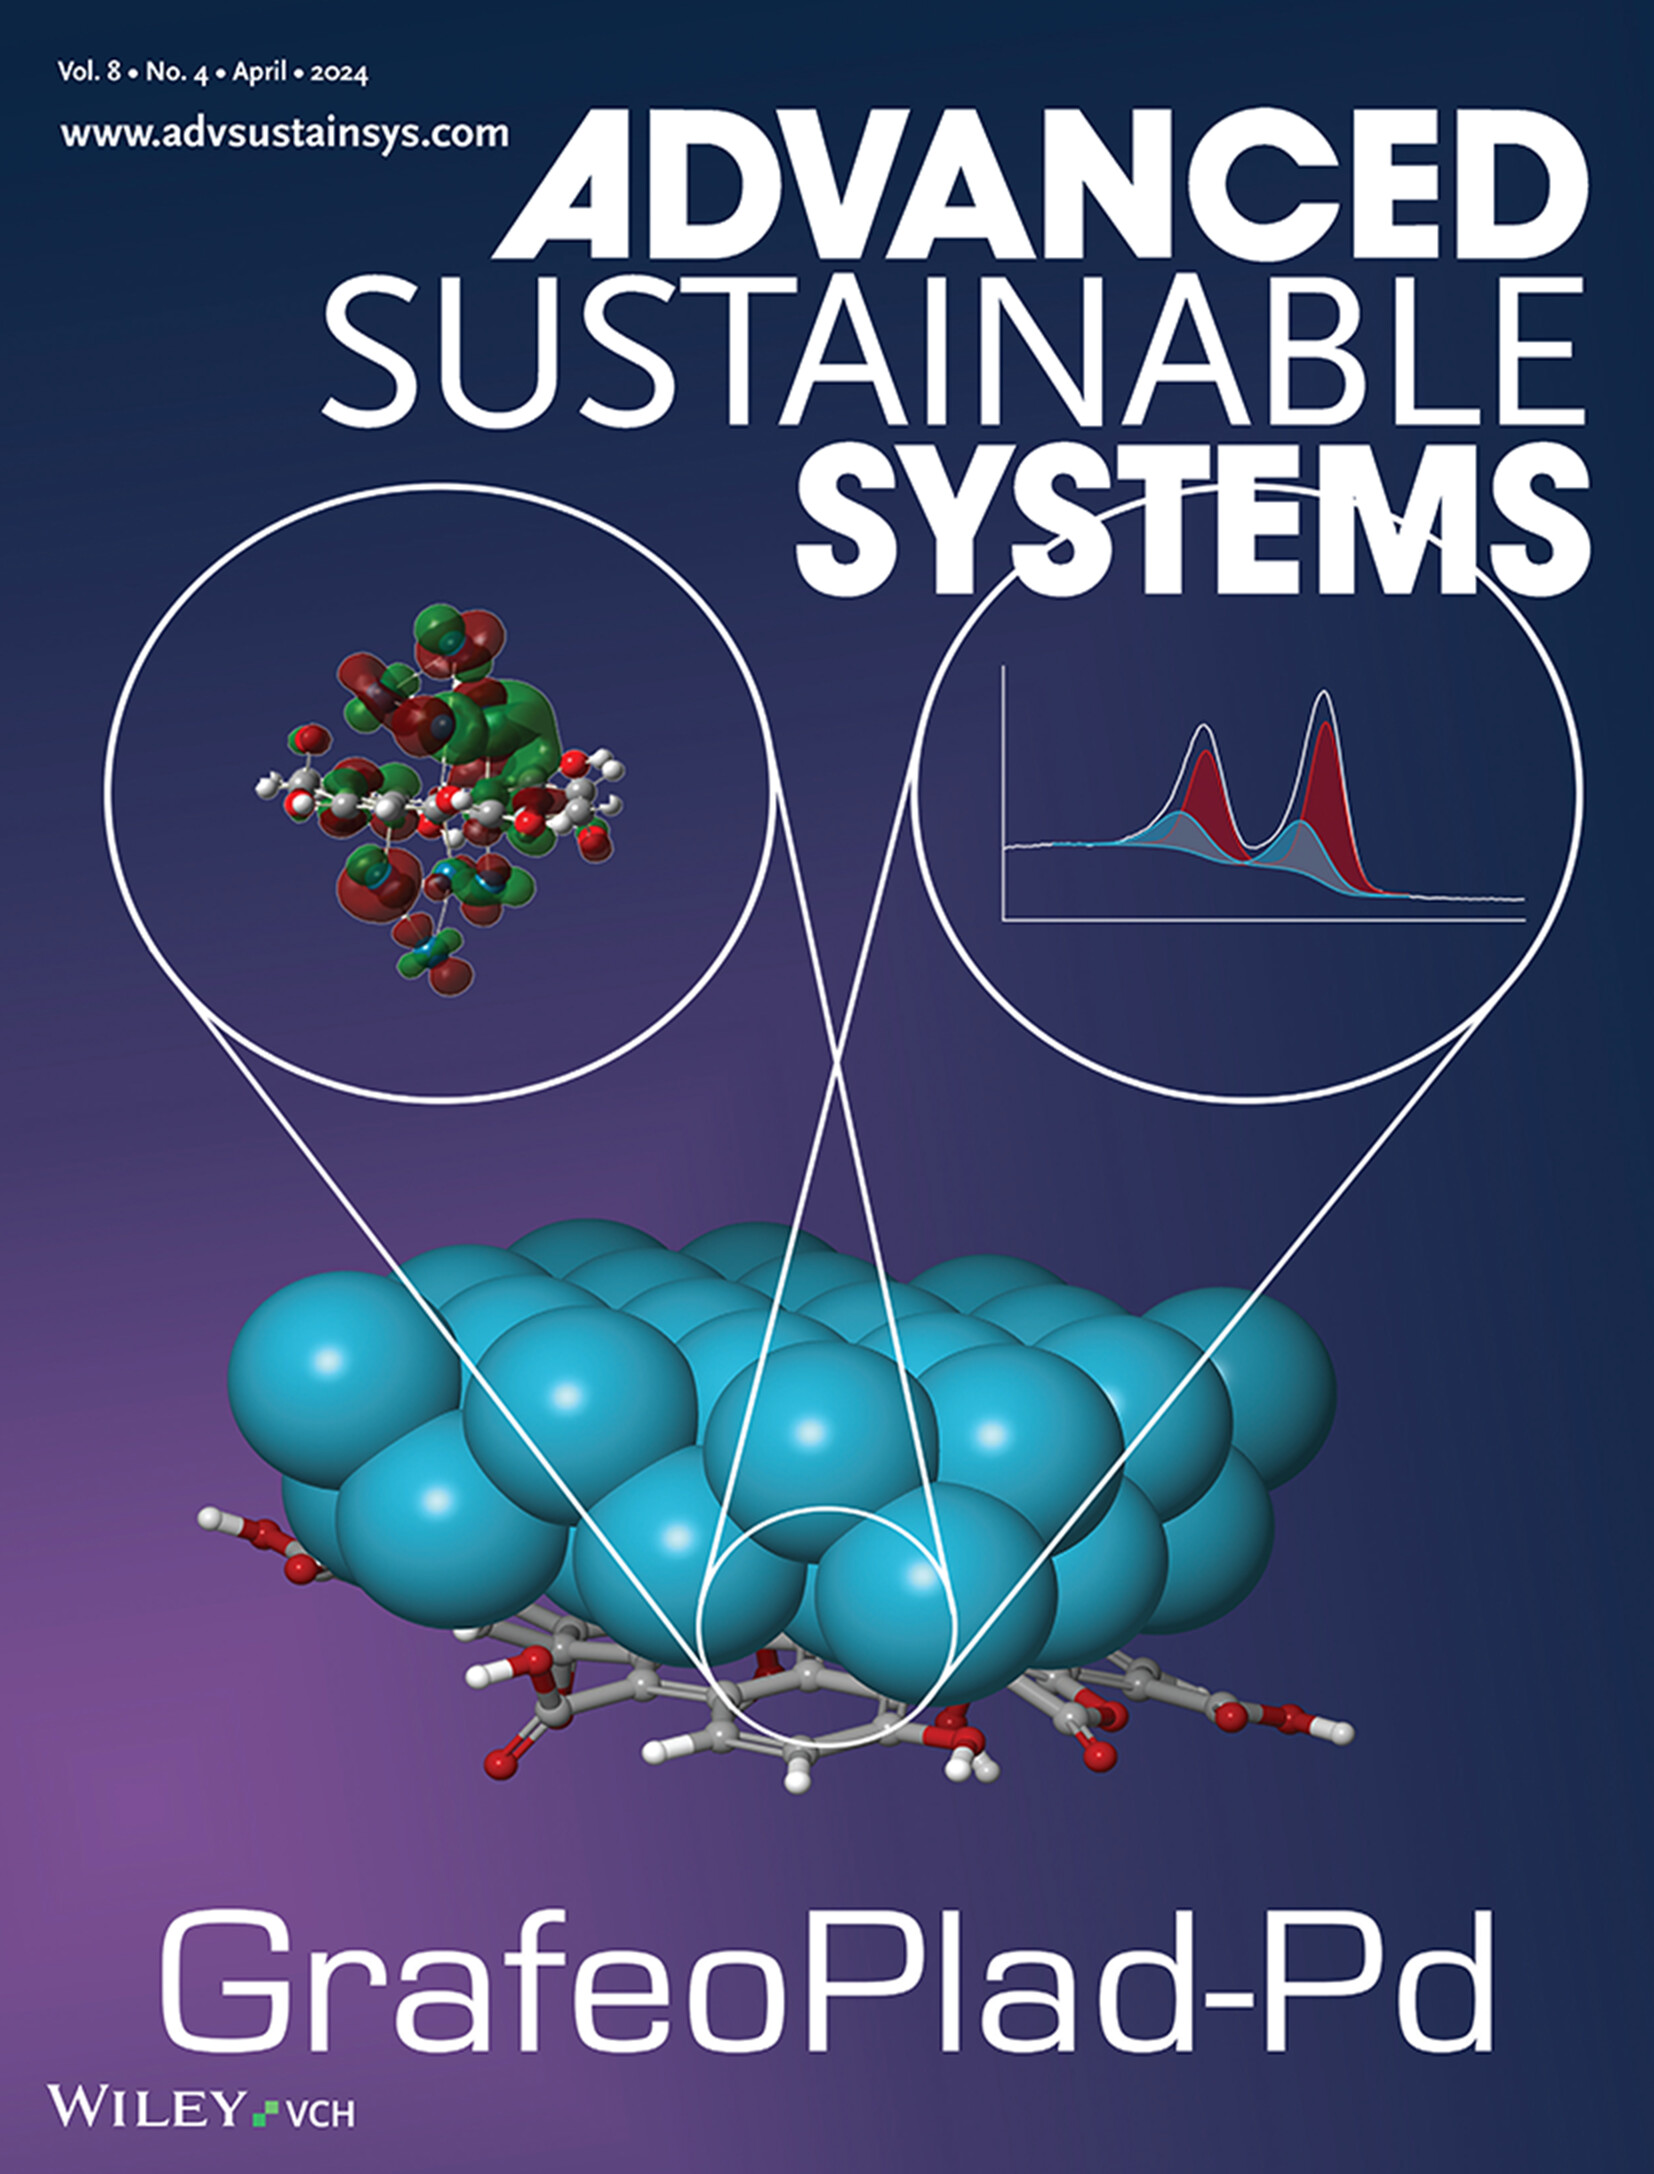 Cover of
                Advanced Sustainable Systems issue 4/2024 dedicated to
                work shedding light on th structure of GrafeoPlad